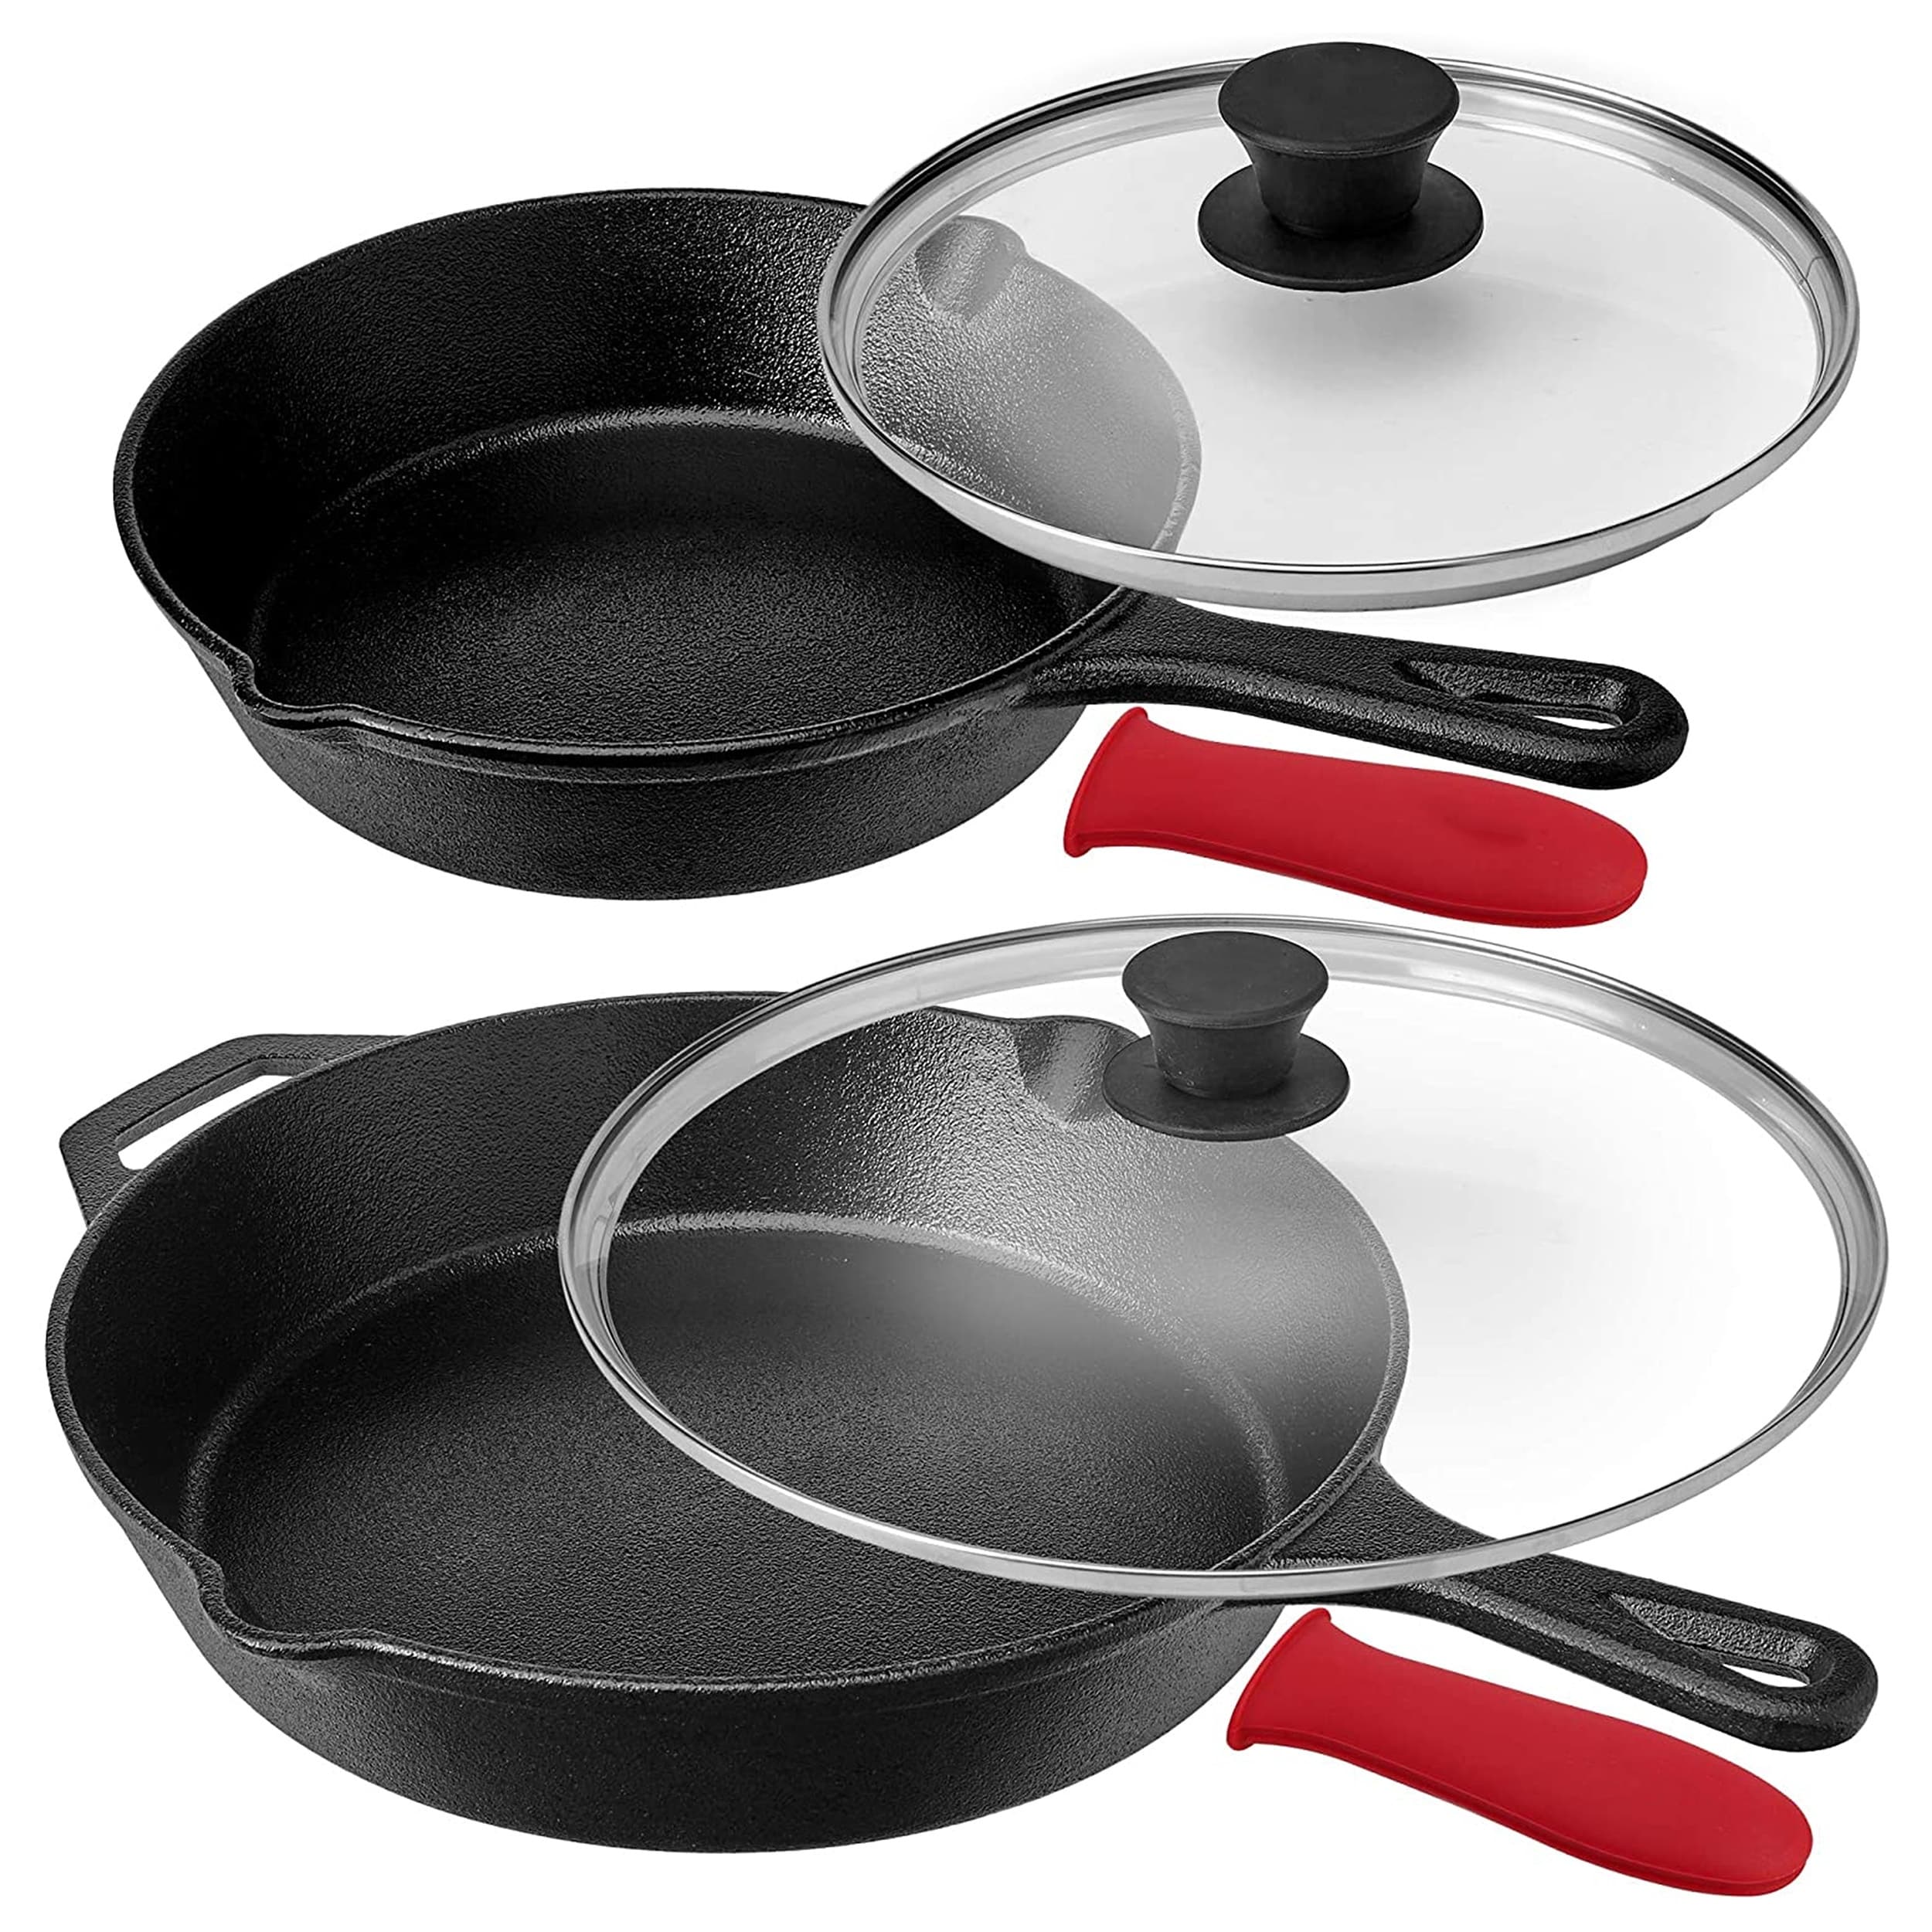 https://ak1.ostkcdn.com/images/products/is/images/direct/cdd3efcfde1cf56f46f04c468e10afc7e312d052/MegaChef-Pre-Seasoned-6Pc-Cast-Iron-Skillet-Set-w-Lids-and-Red-Holders.jpg